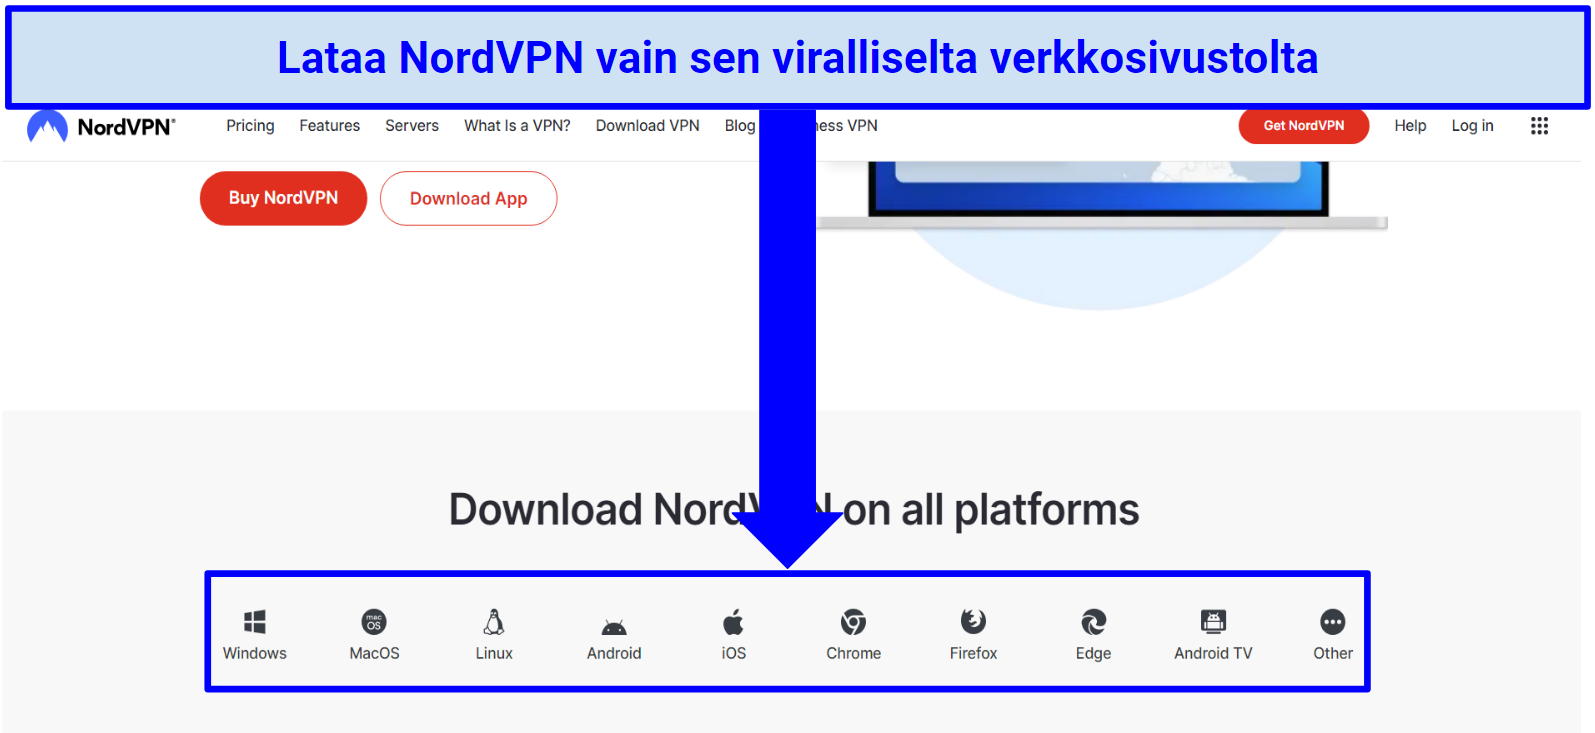 A screenshot showing how to download NordVPN on its website